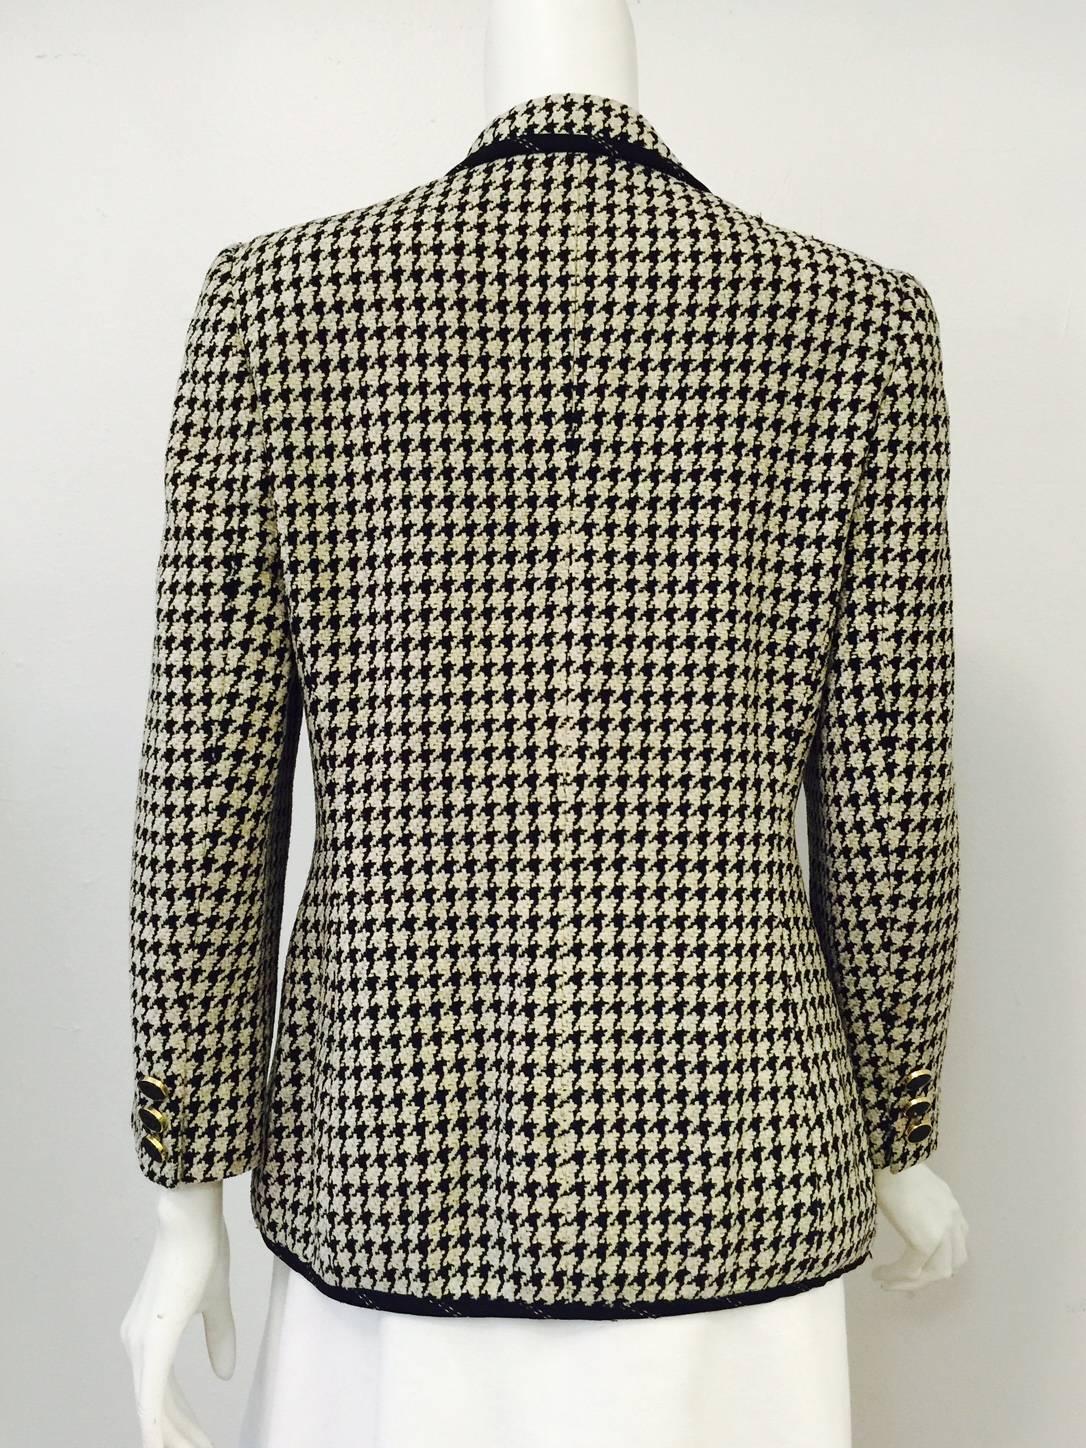 1990s Escada by Margaretha Ley Jacket proves that cozy and comfortable can be chic!  Features luxurious black and tan wool blend hounds tooth chenille fabric, five-button closure and three-button sleeves. Four front pockets have working buttons. 